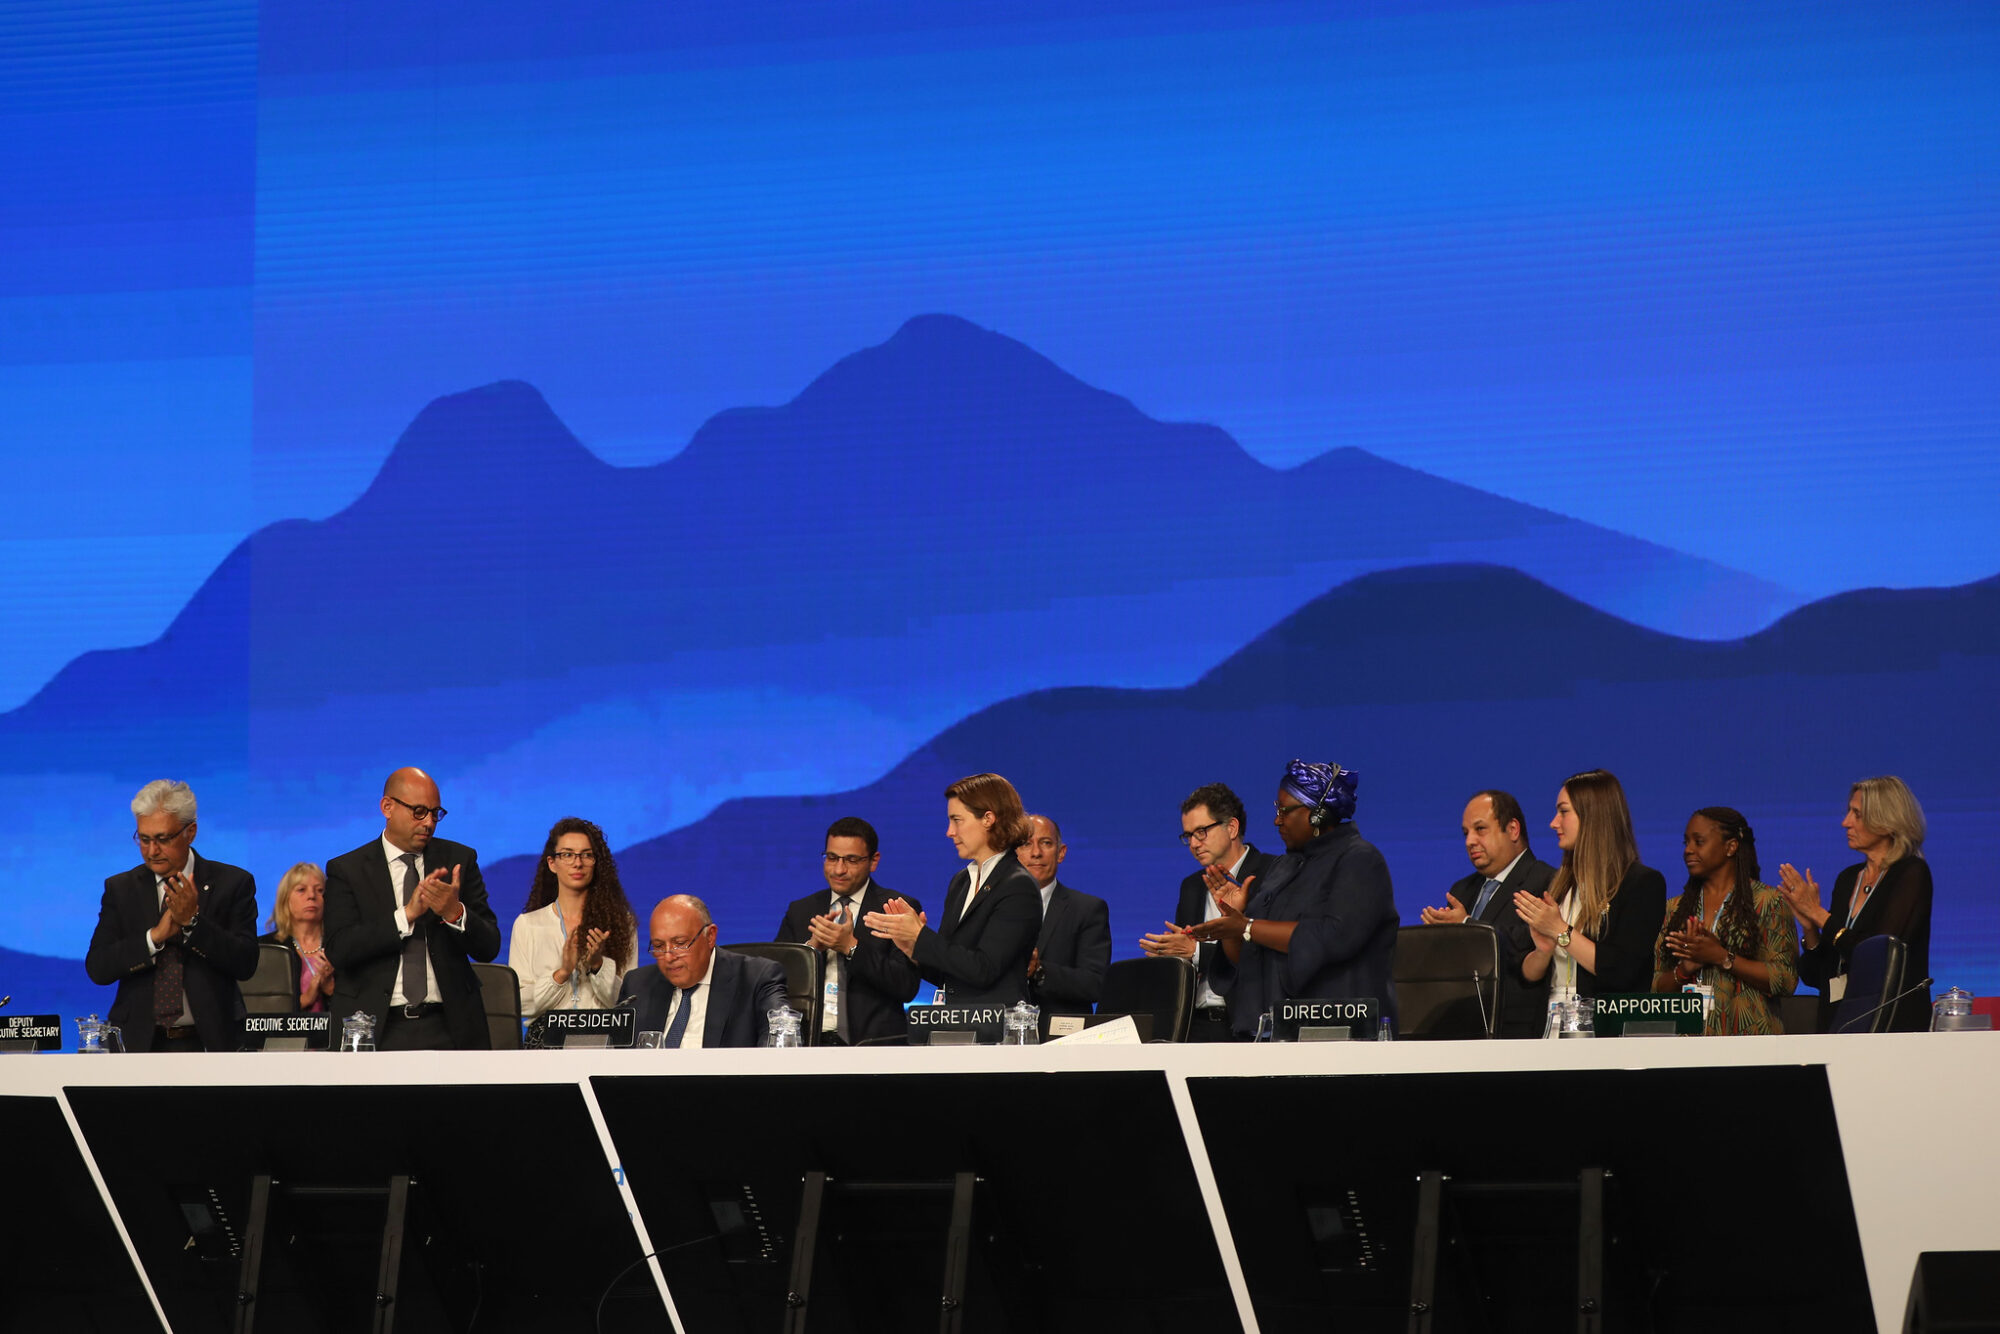 <p>Applause after the final plenary session of COP27 in Egypt, where it was agreed to create a specific fund to finance loss and damage caused by climate change. (Image: UN / Kiara Worth / CC BY-NC-SA 2.0)</p>